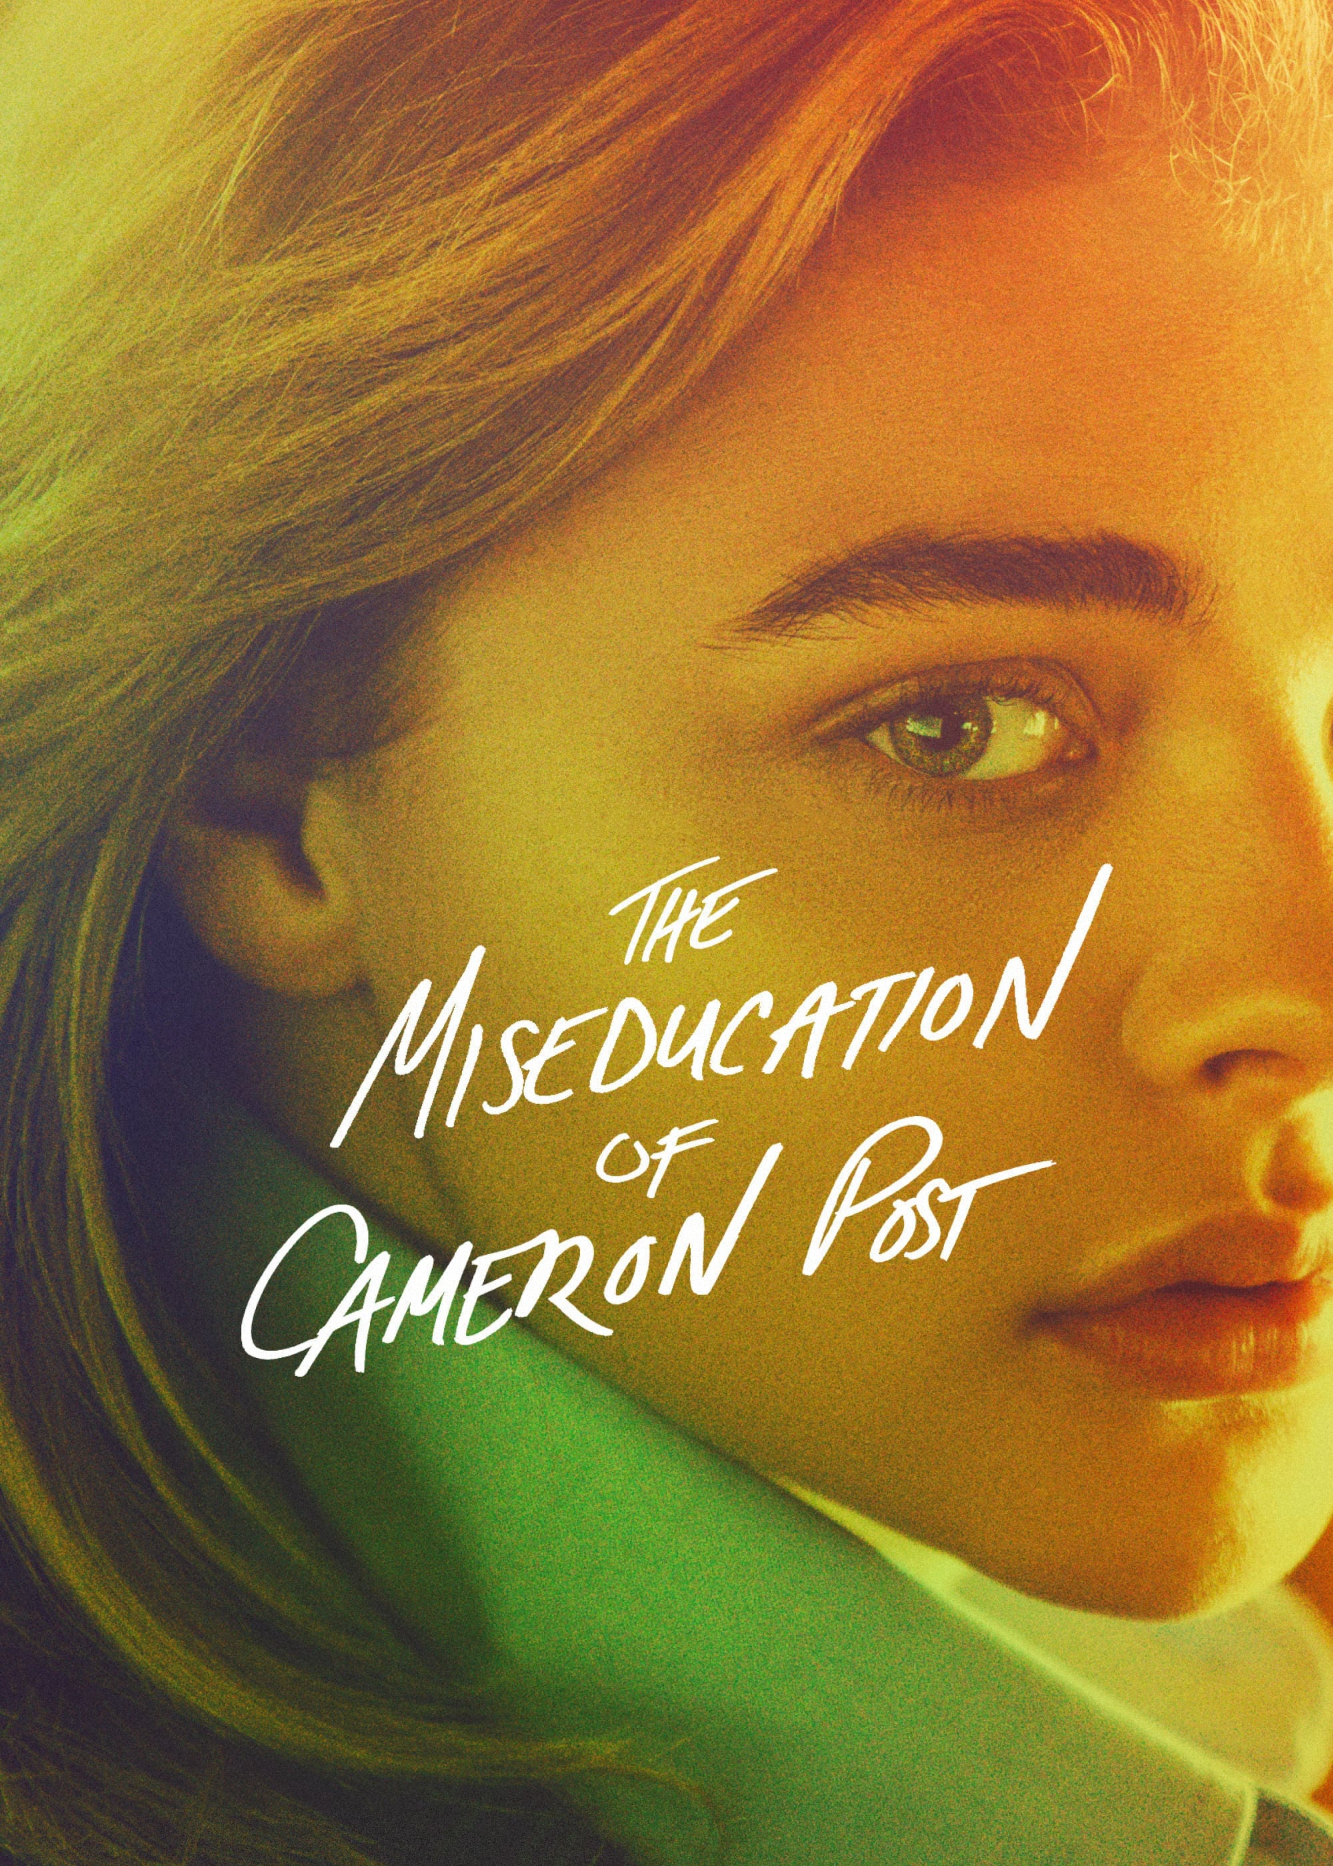 Banner Phim The Miseducation Of Cameron Post (The Miseducation Of Cameron Post)